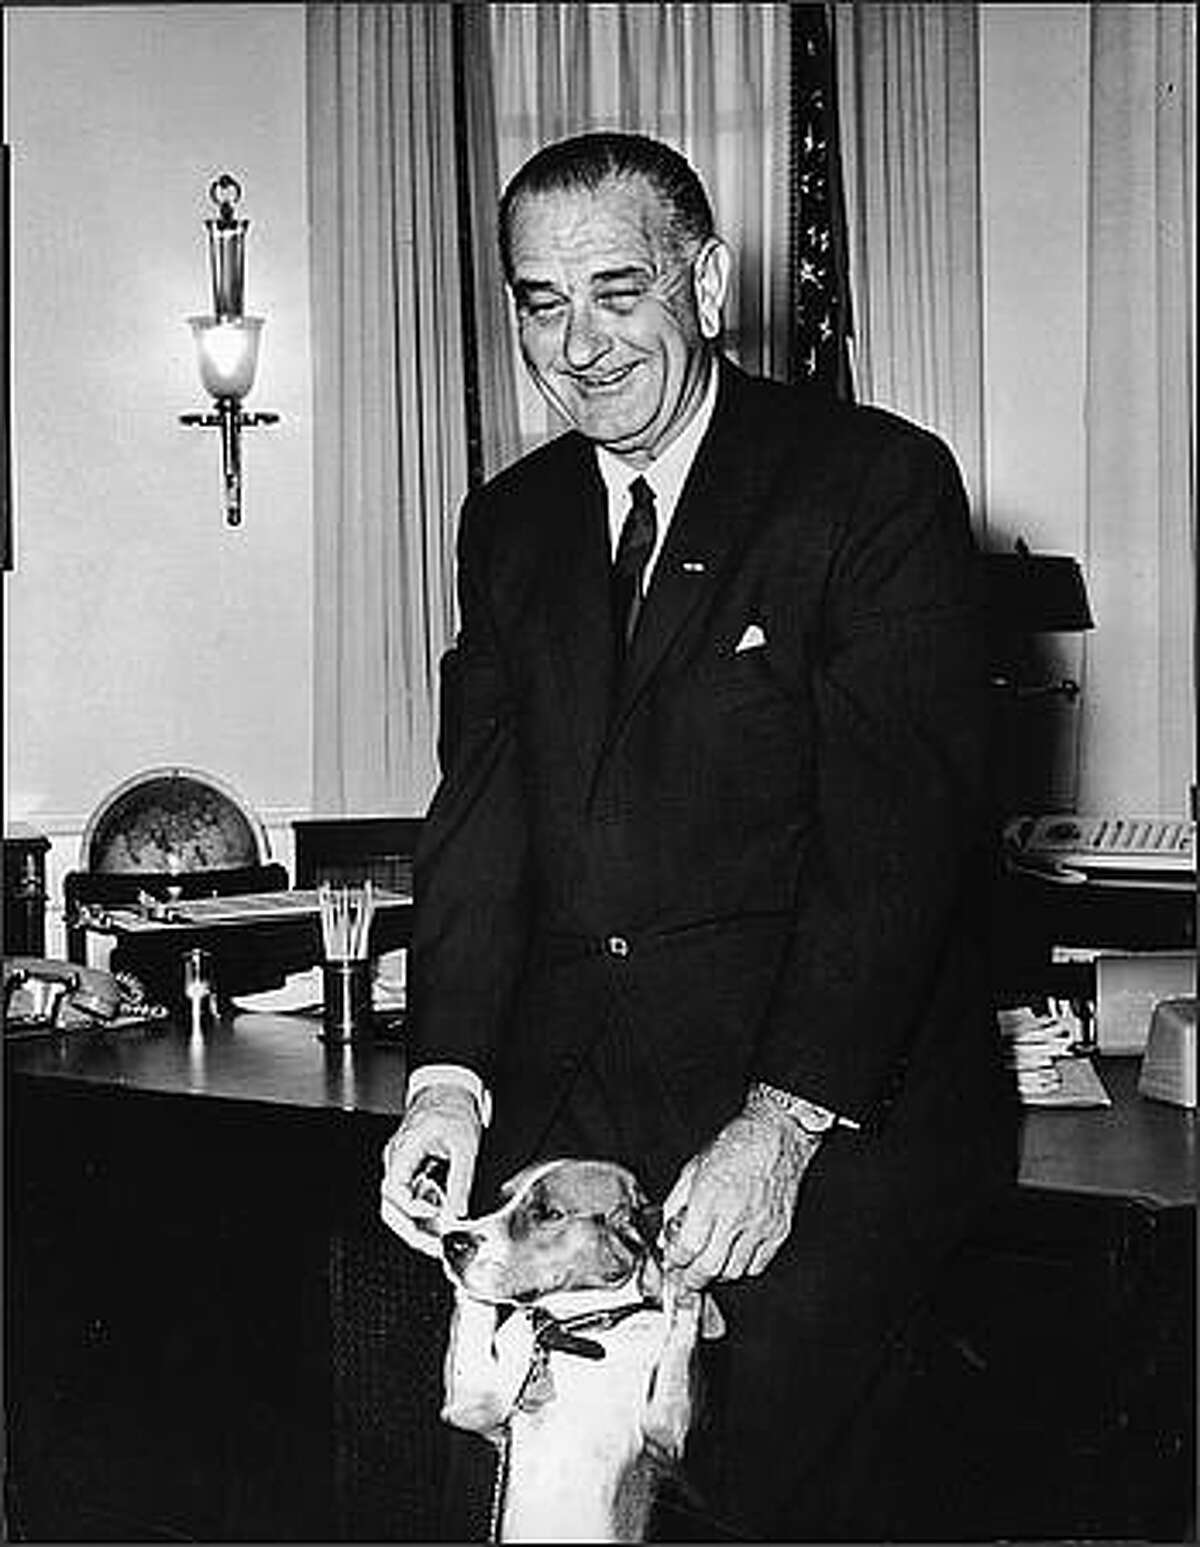 President Lyndon Baines Johnson smiles as he plays with his pet beagle 'Him' in the Chief Executive Office of the White House, Washington, DC, October 7, 1965. (Photo by Pictorial Parade/Getty Images)